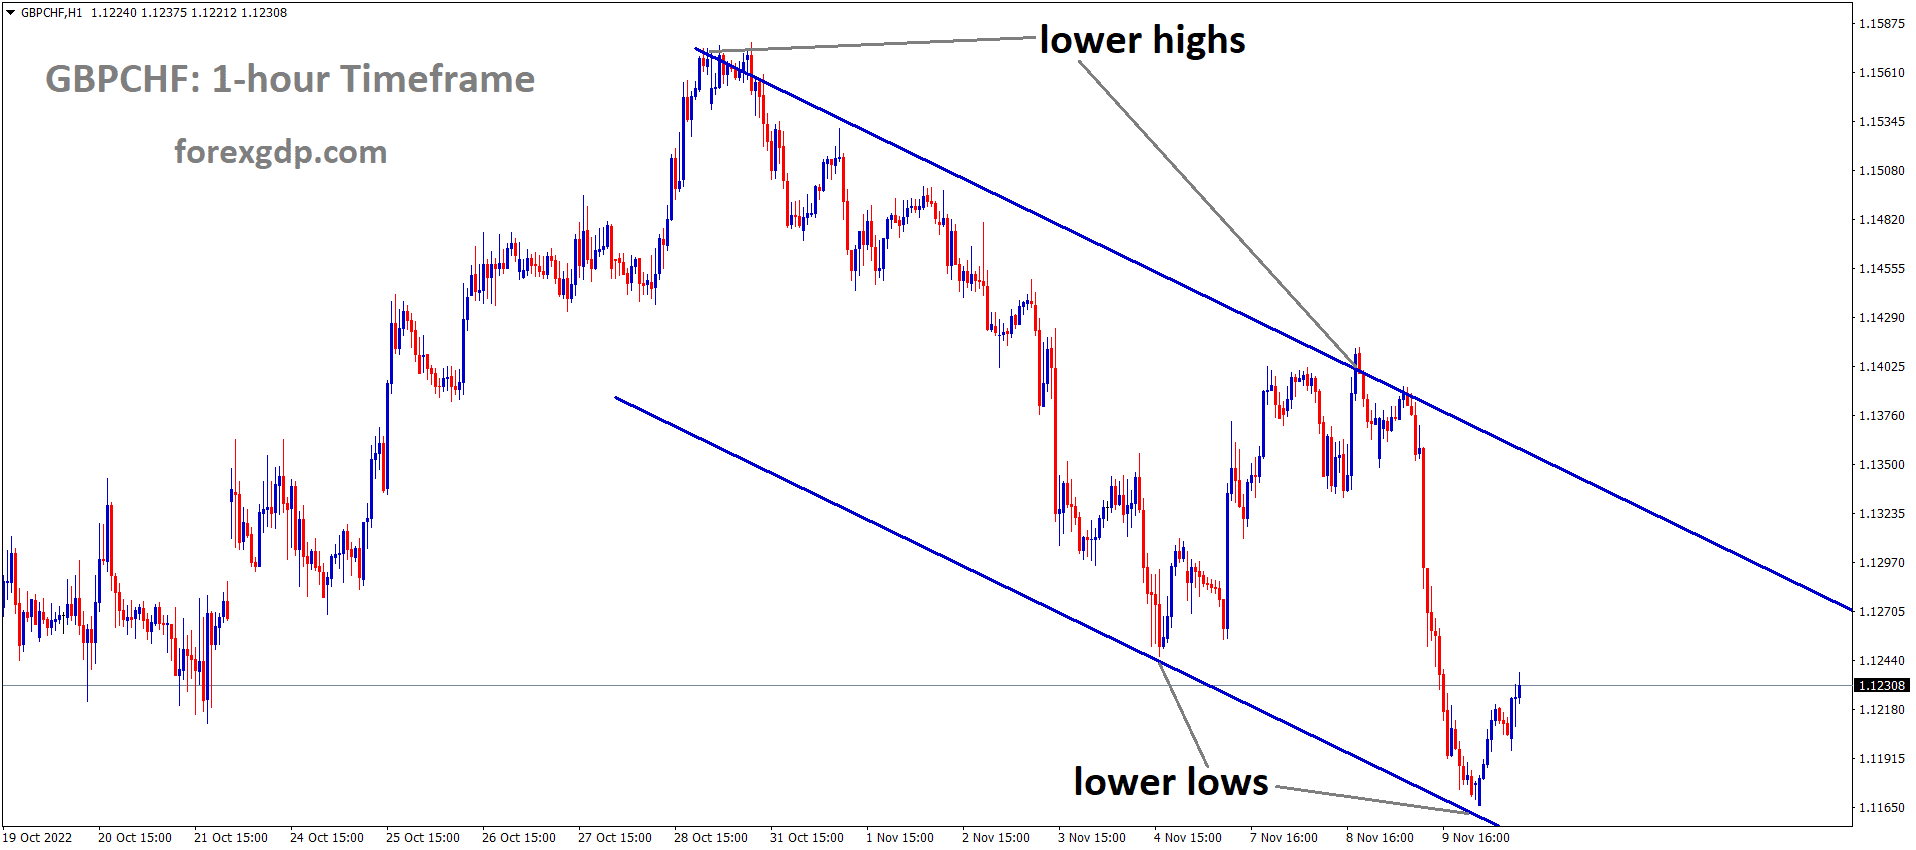 GBPCHF is moving in the Descending channel and the market has rebounded from the lower low area of the channel